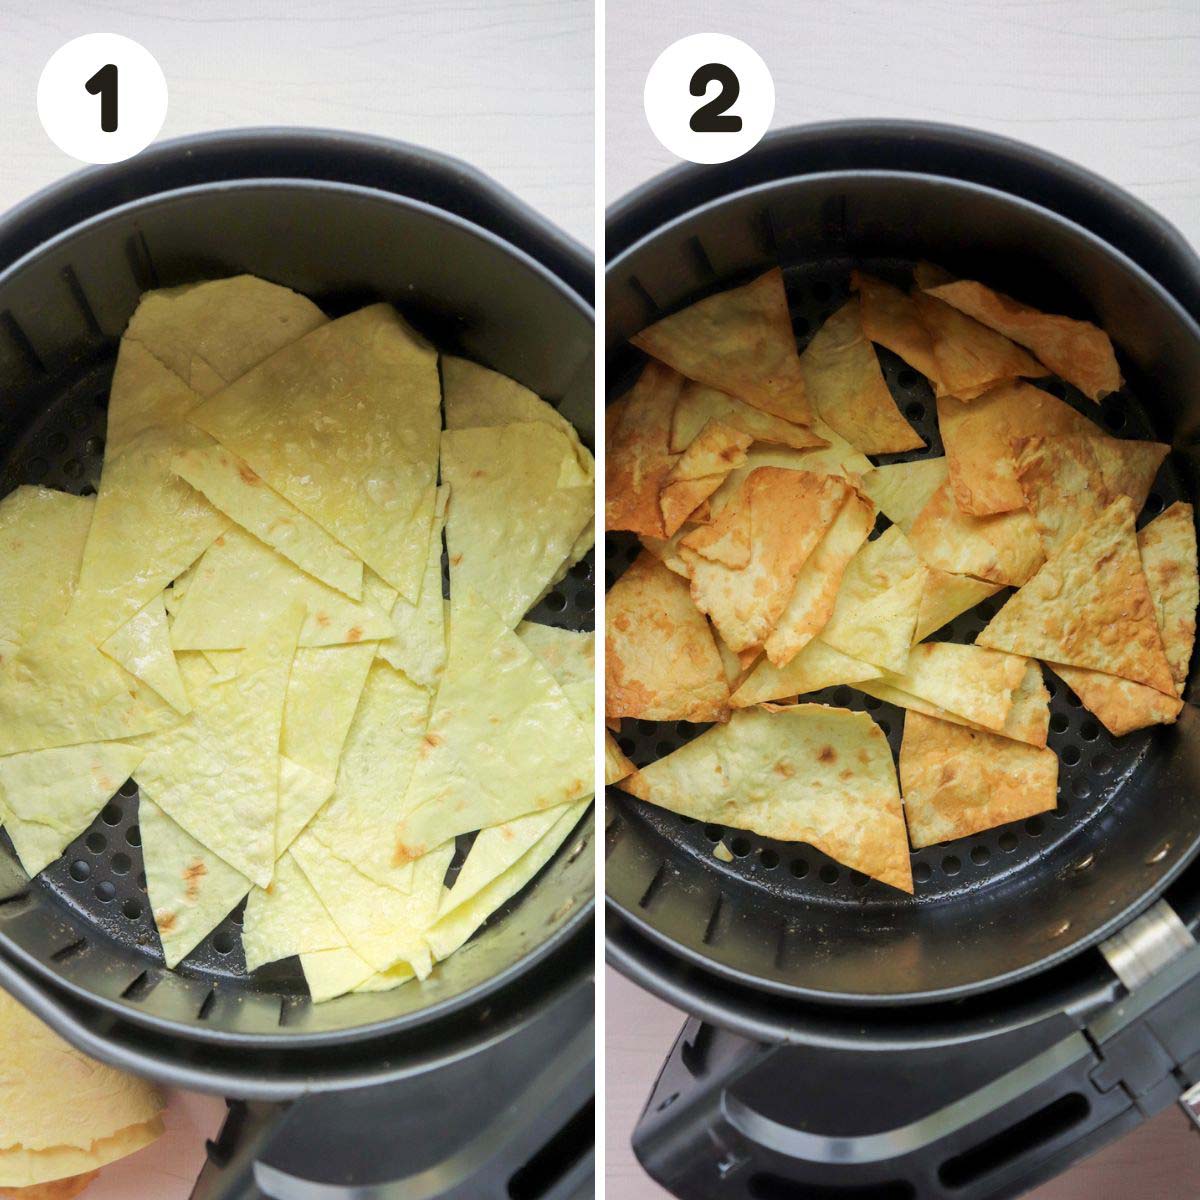 Steps to make the tortilla chips.